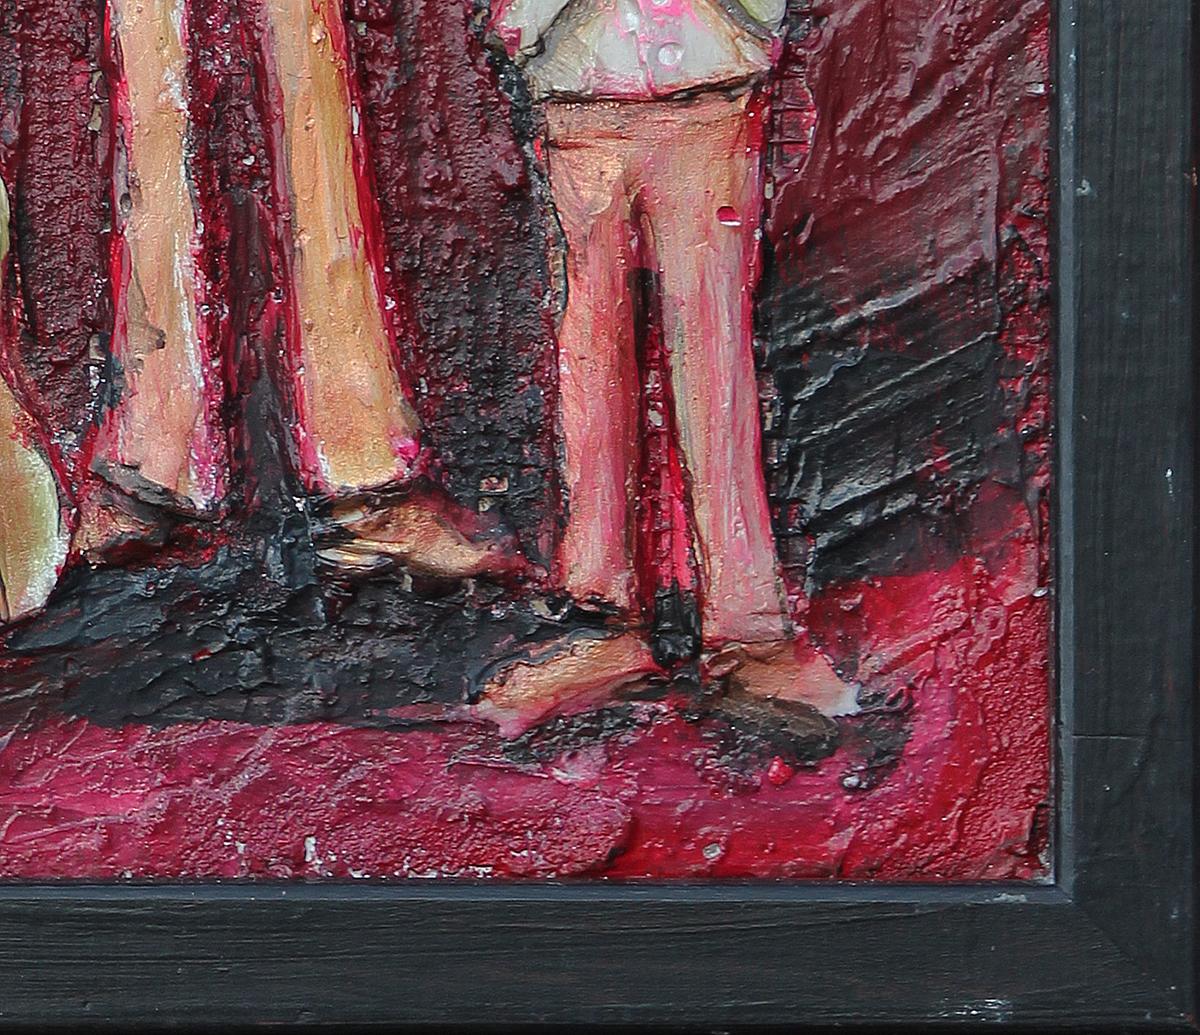 Red Abstract Figurative Mixed Media Cast Stone Painting of Three Musicians - Black Figurative Sculpture by David Adickes